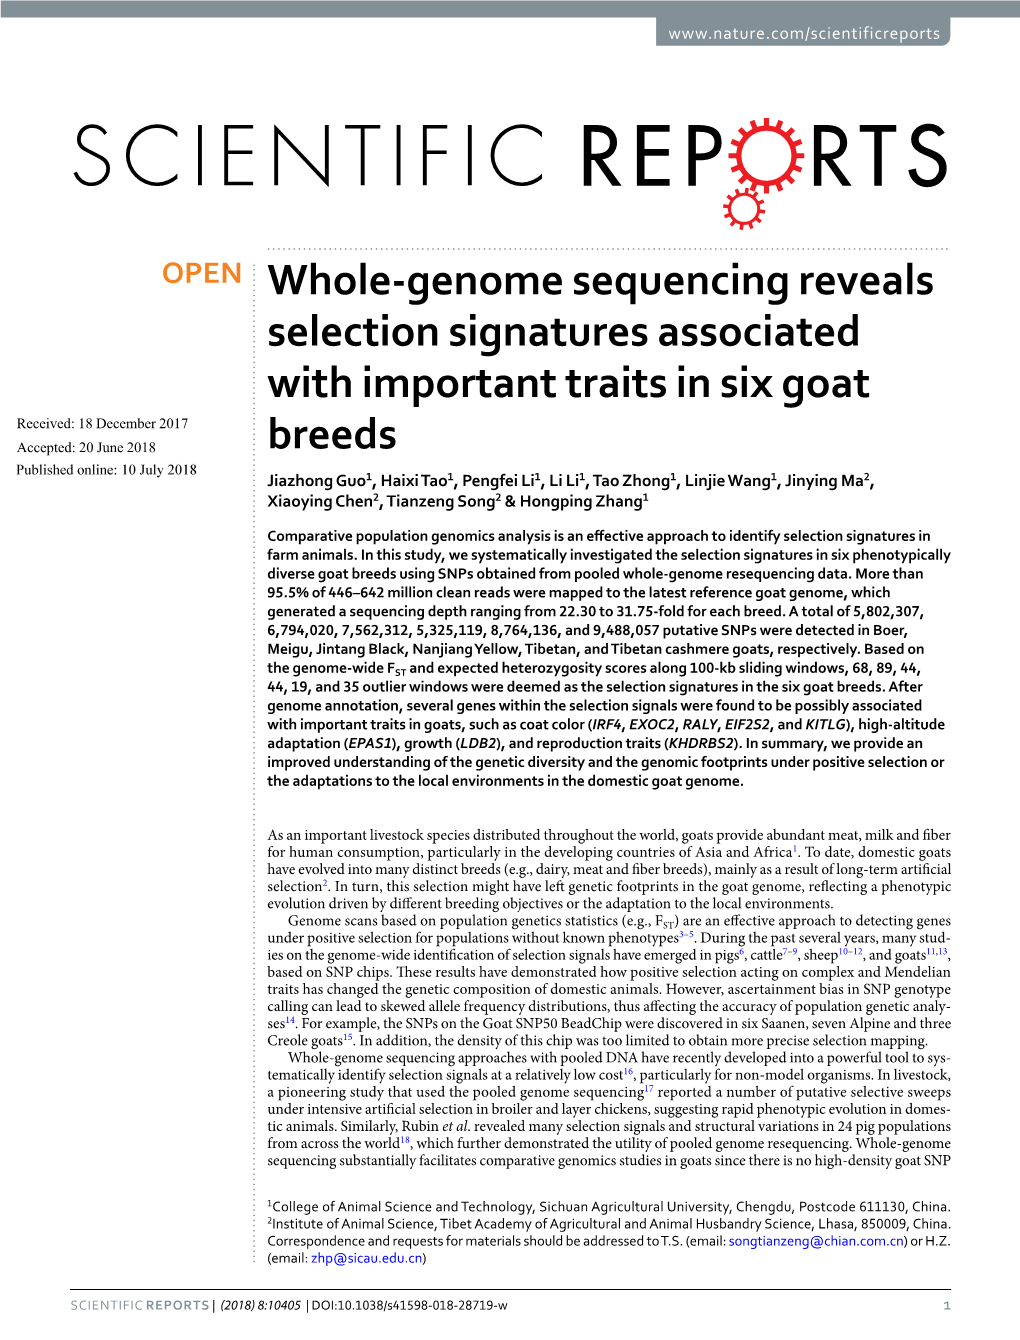 Whole-Genome Sequencing Reveals Selection Signatures Associated